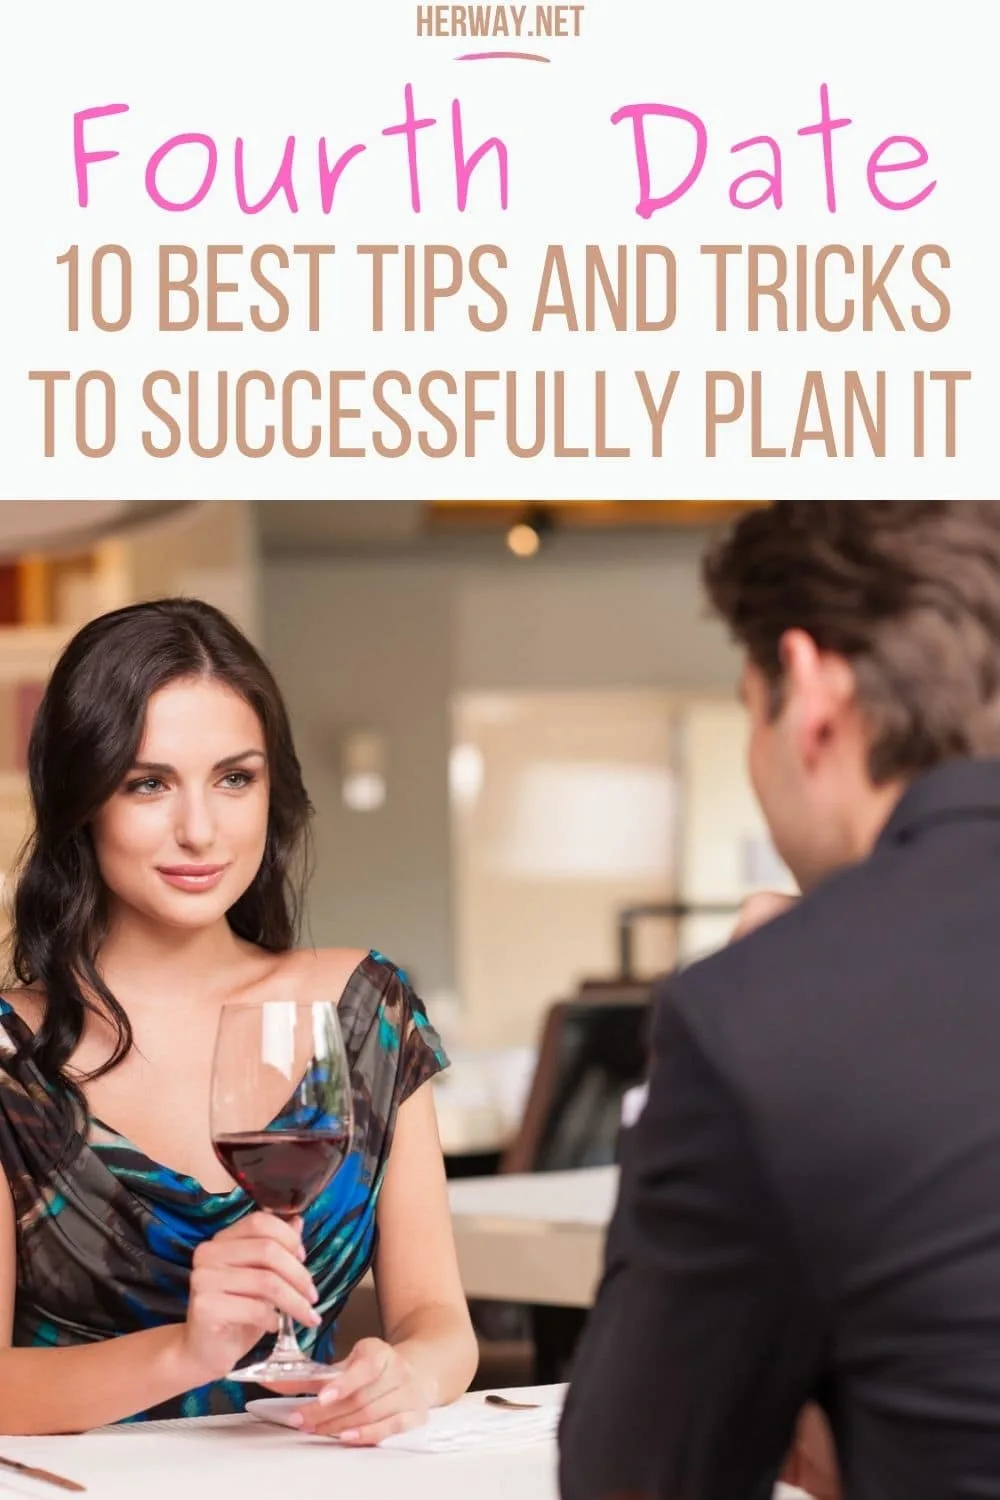 Fourth Date: 10 Best Tips And Tricks To Successfully Plan It